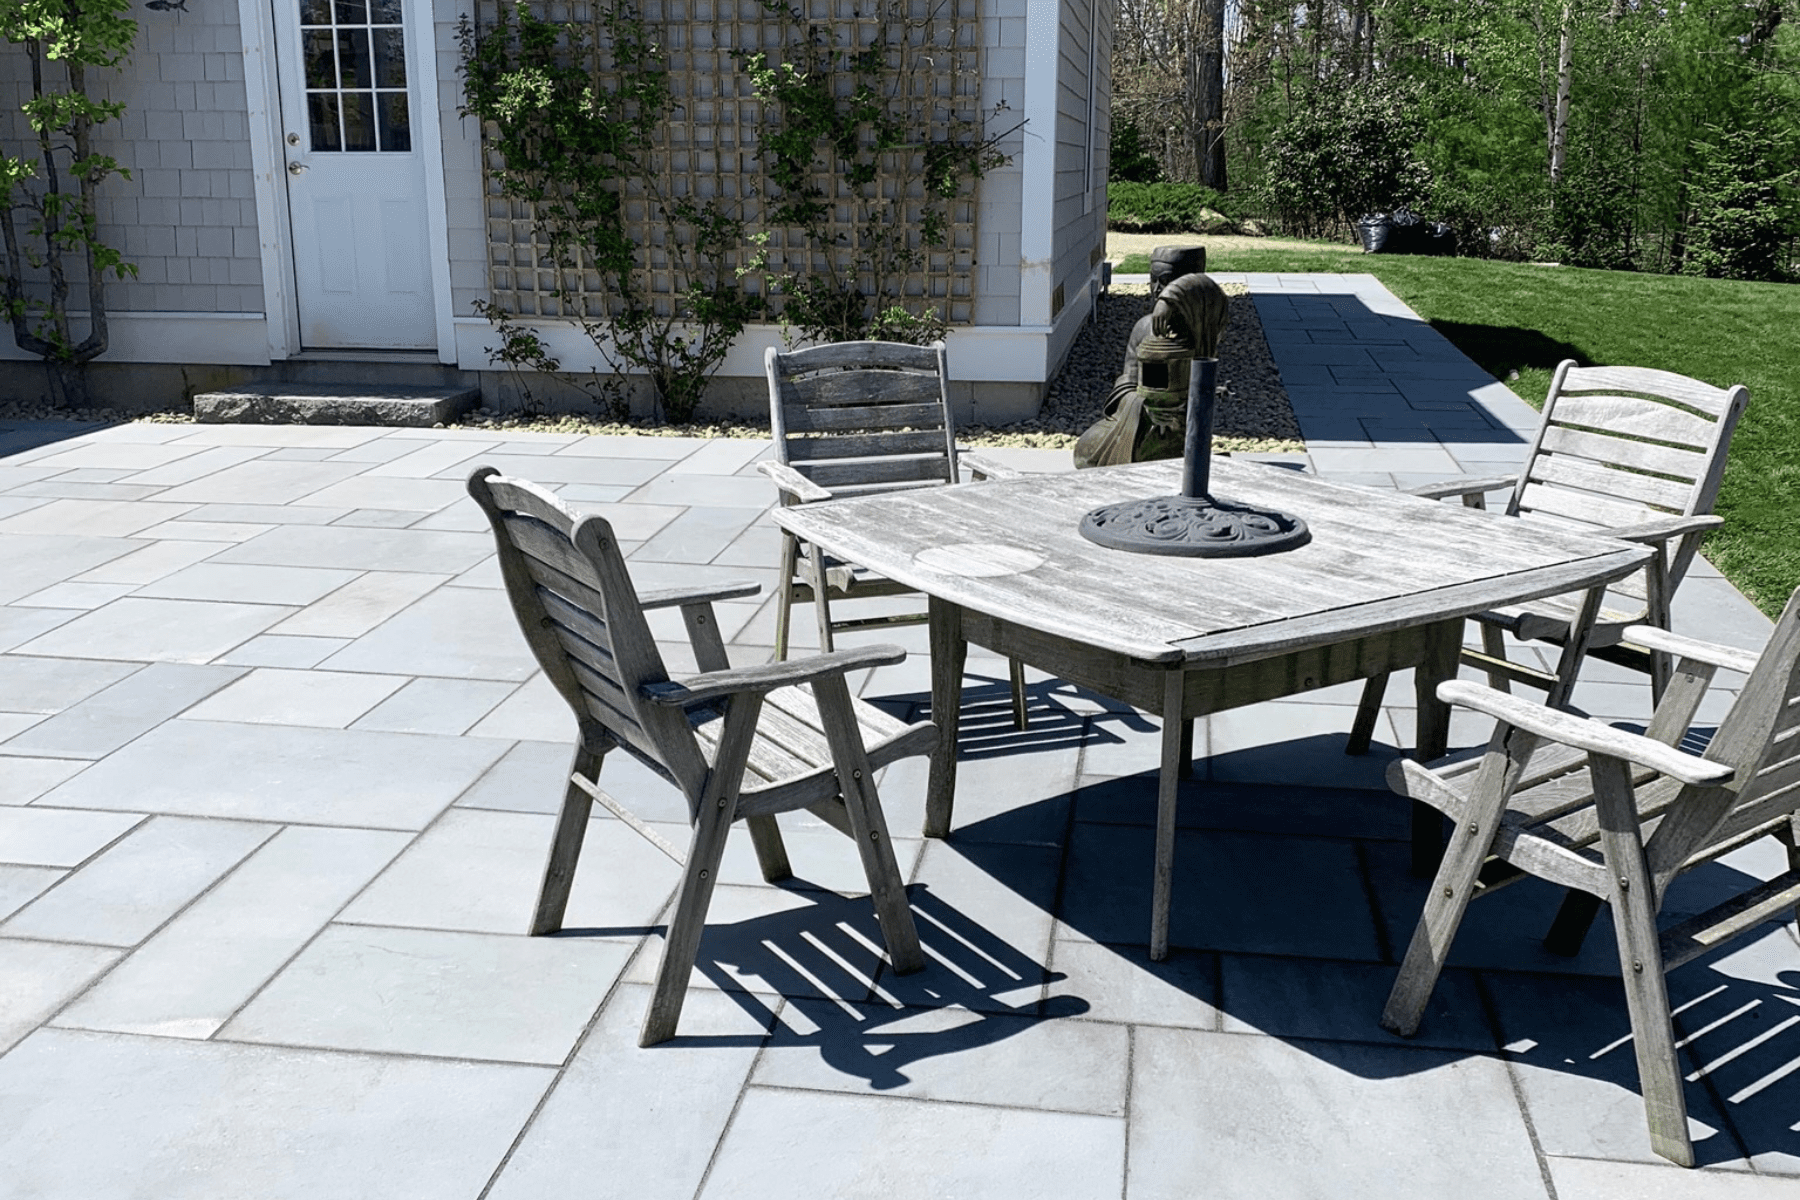 Blue Stone Patio with landscaping